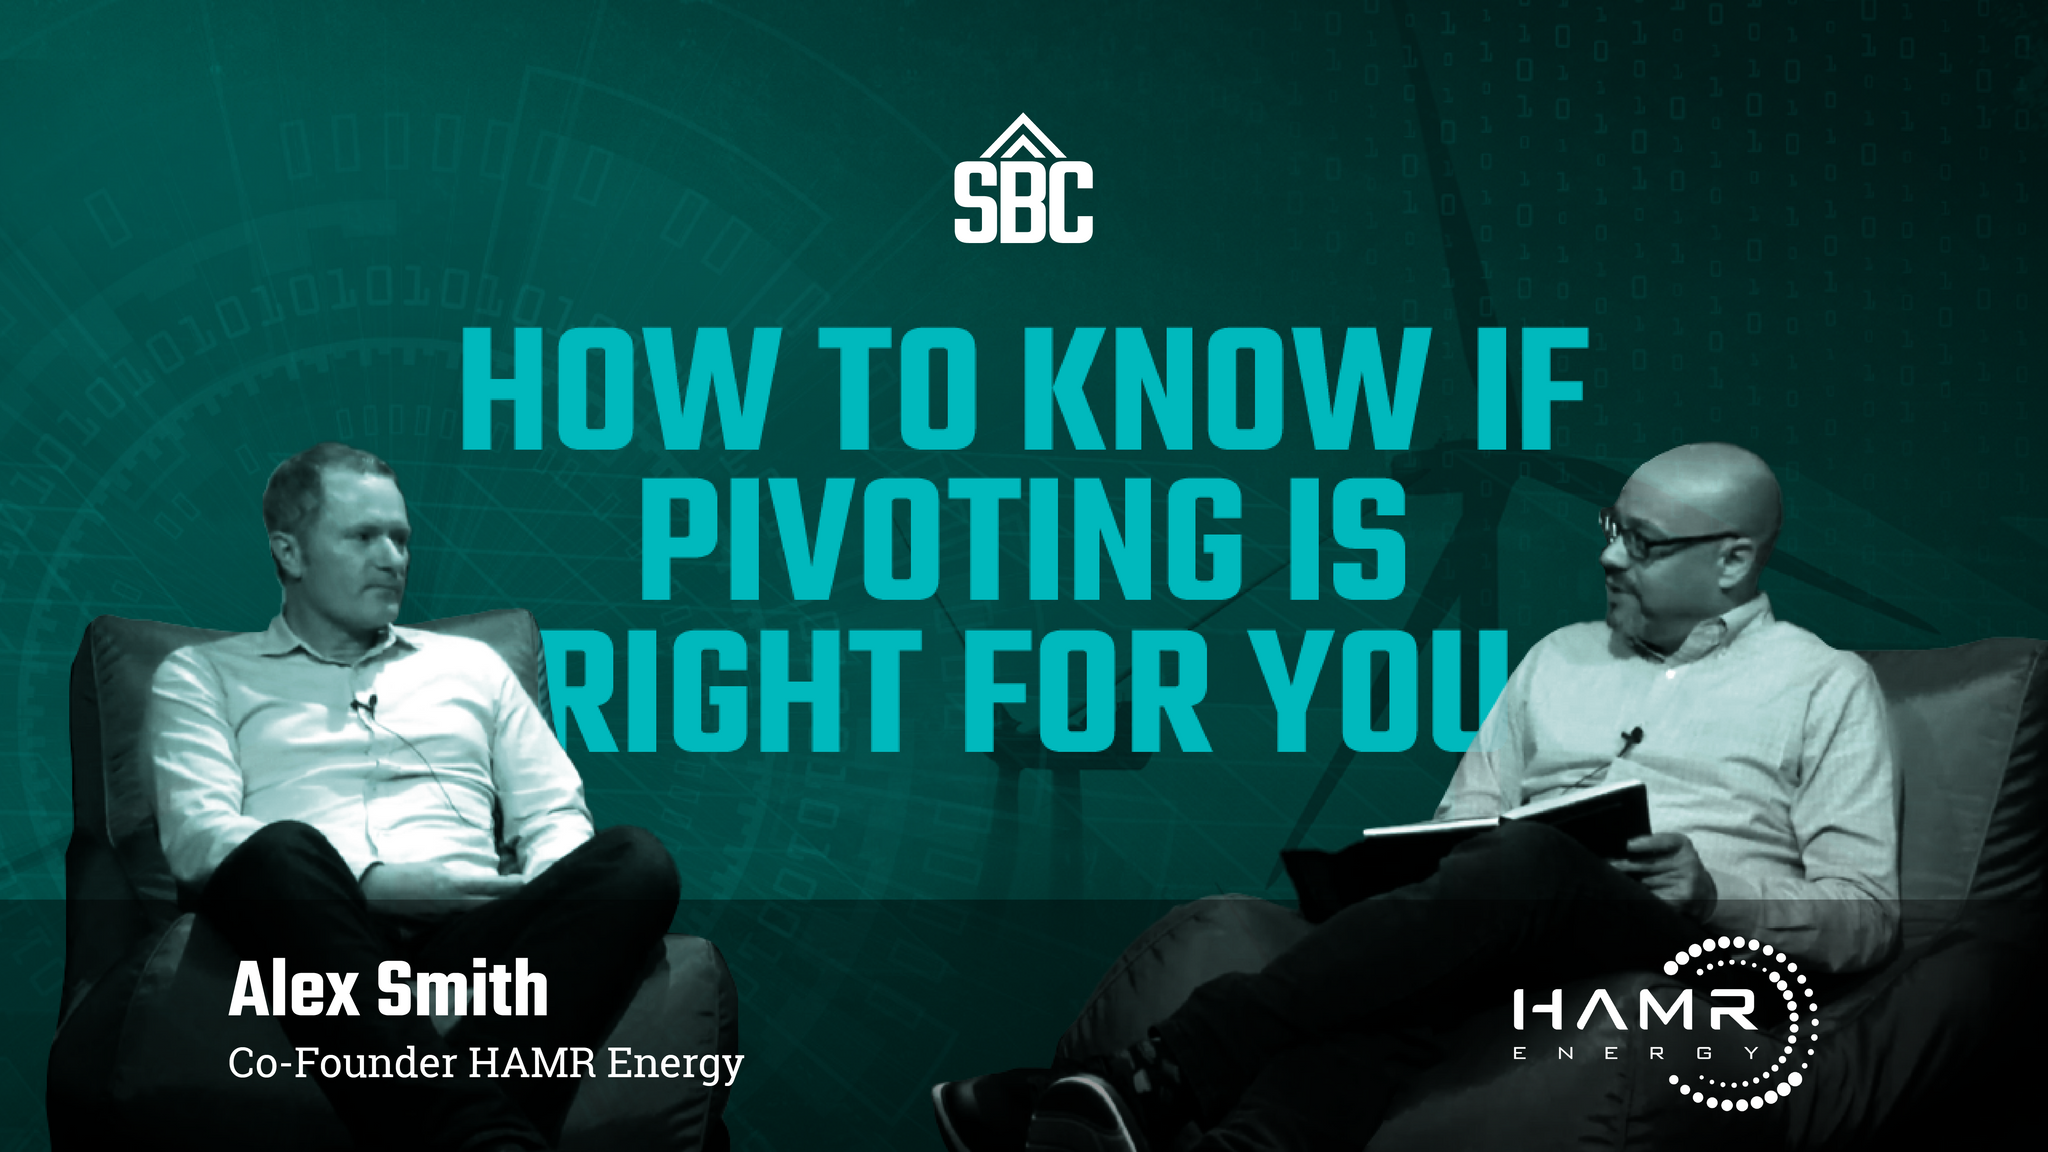 How to know if pivoting is right for you - Alex Smith, HAMR Energy